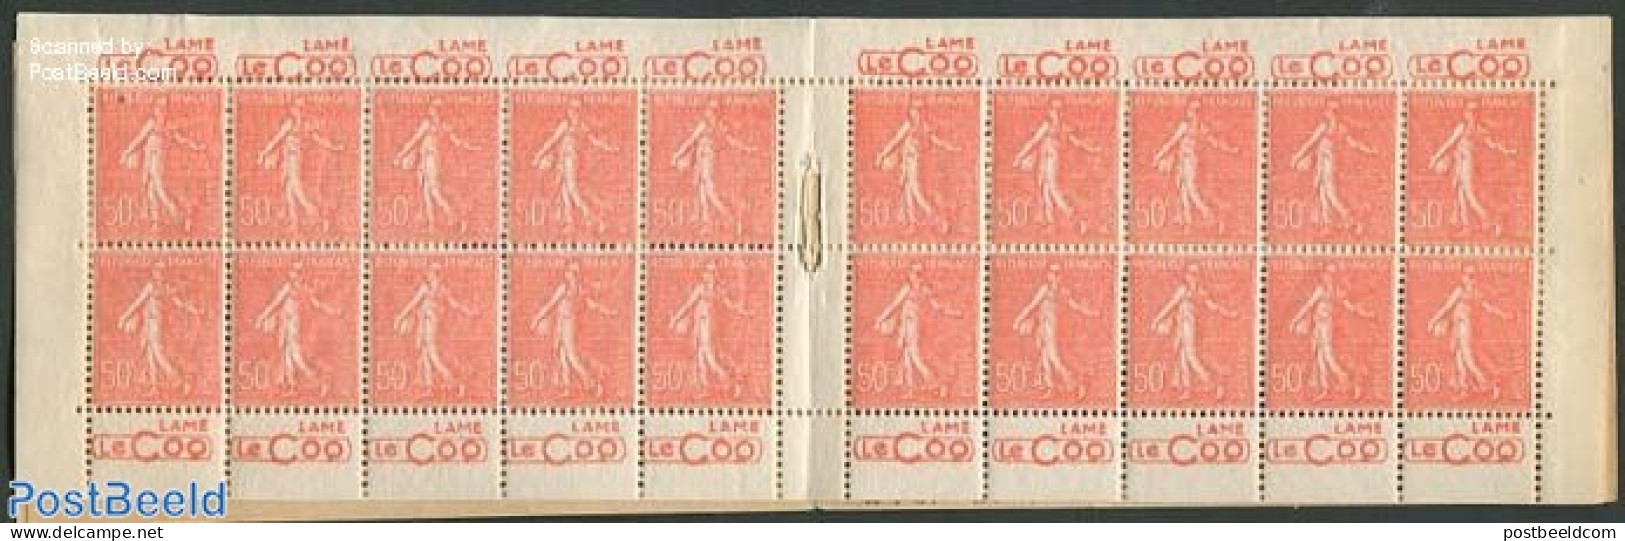 France 1924 20x50c Booklet (Lame Le Coq 4x), Mint NH, Stamp Booklets - Nuovi